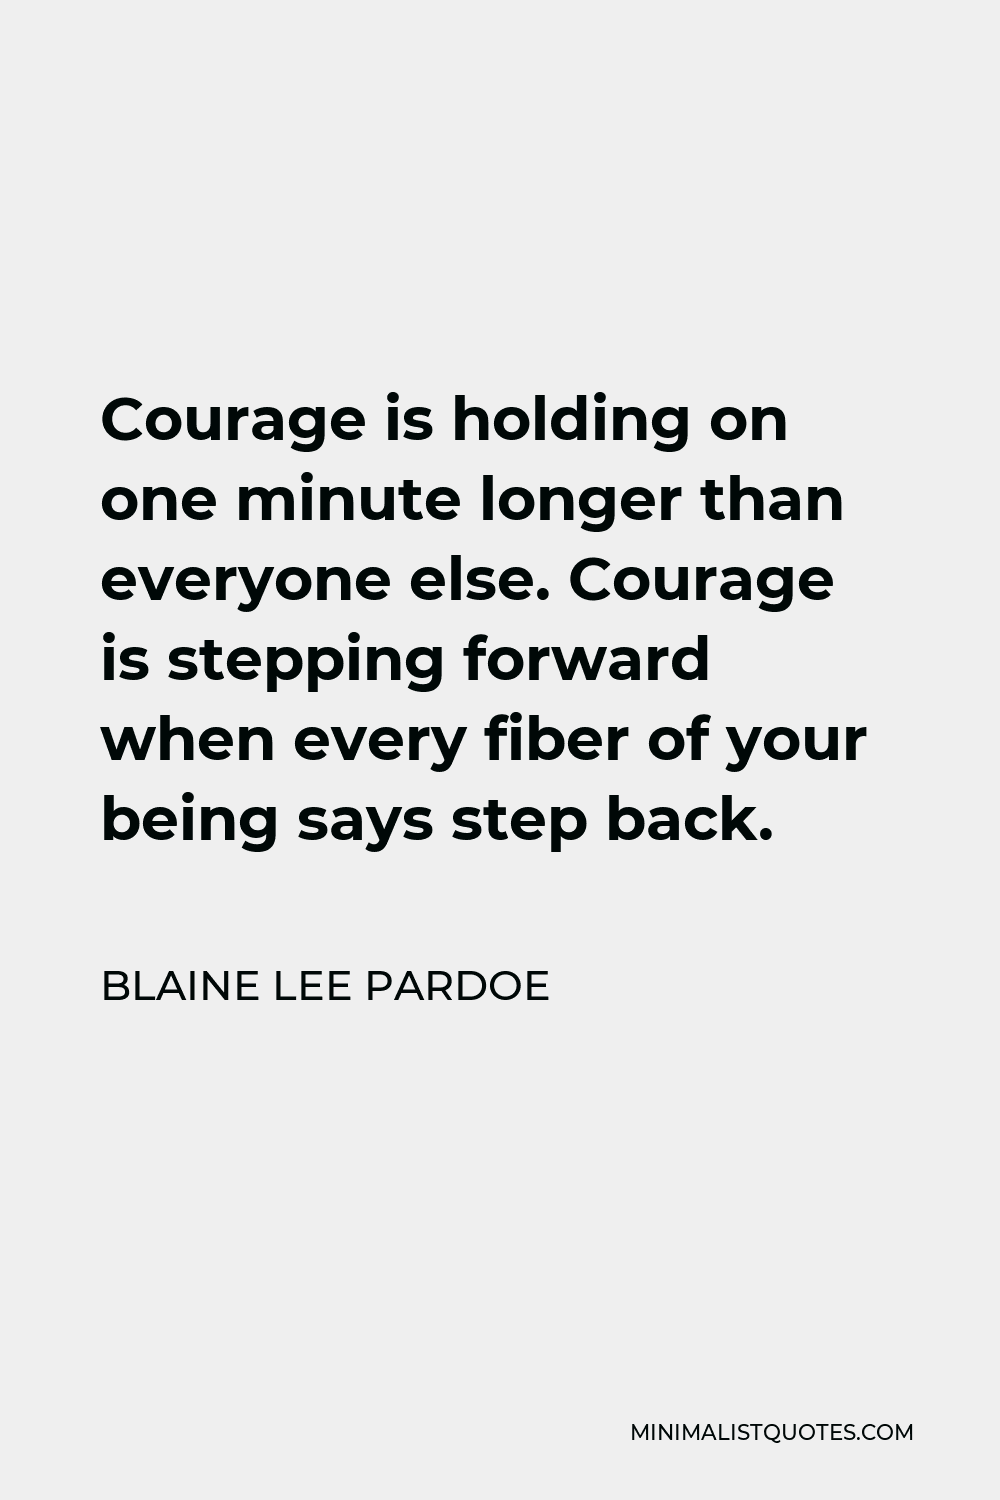 Blaine Lee Pardoe Quote - Courage is holding on one minute longer than everyone else. Courage is stepping forward when every fiber of your being says step back.